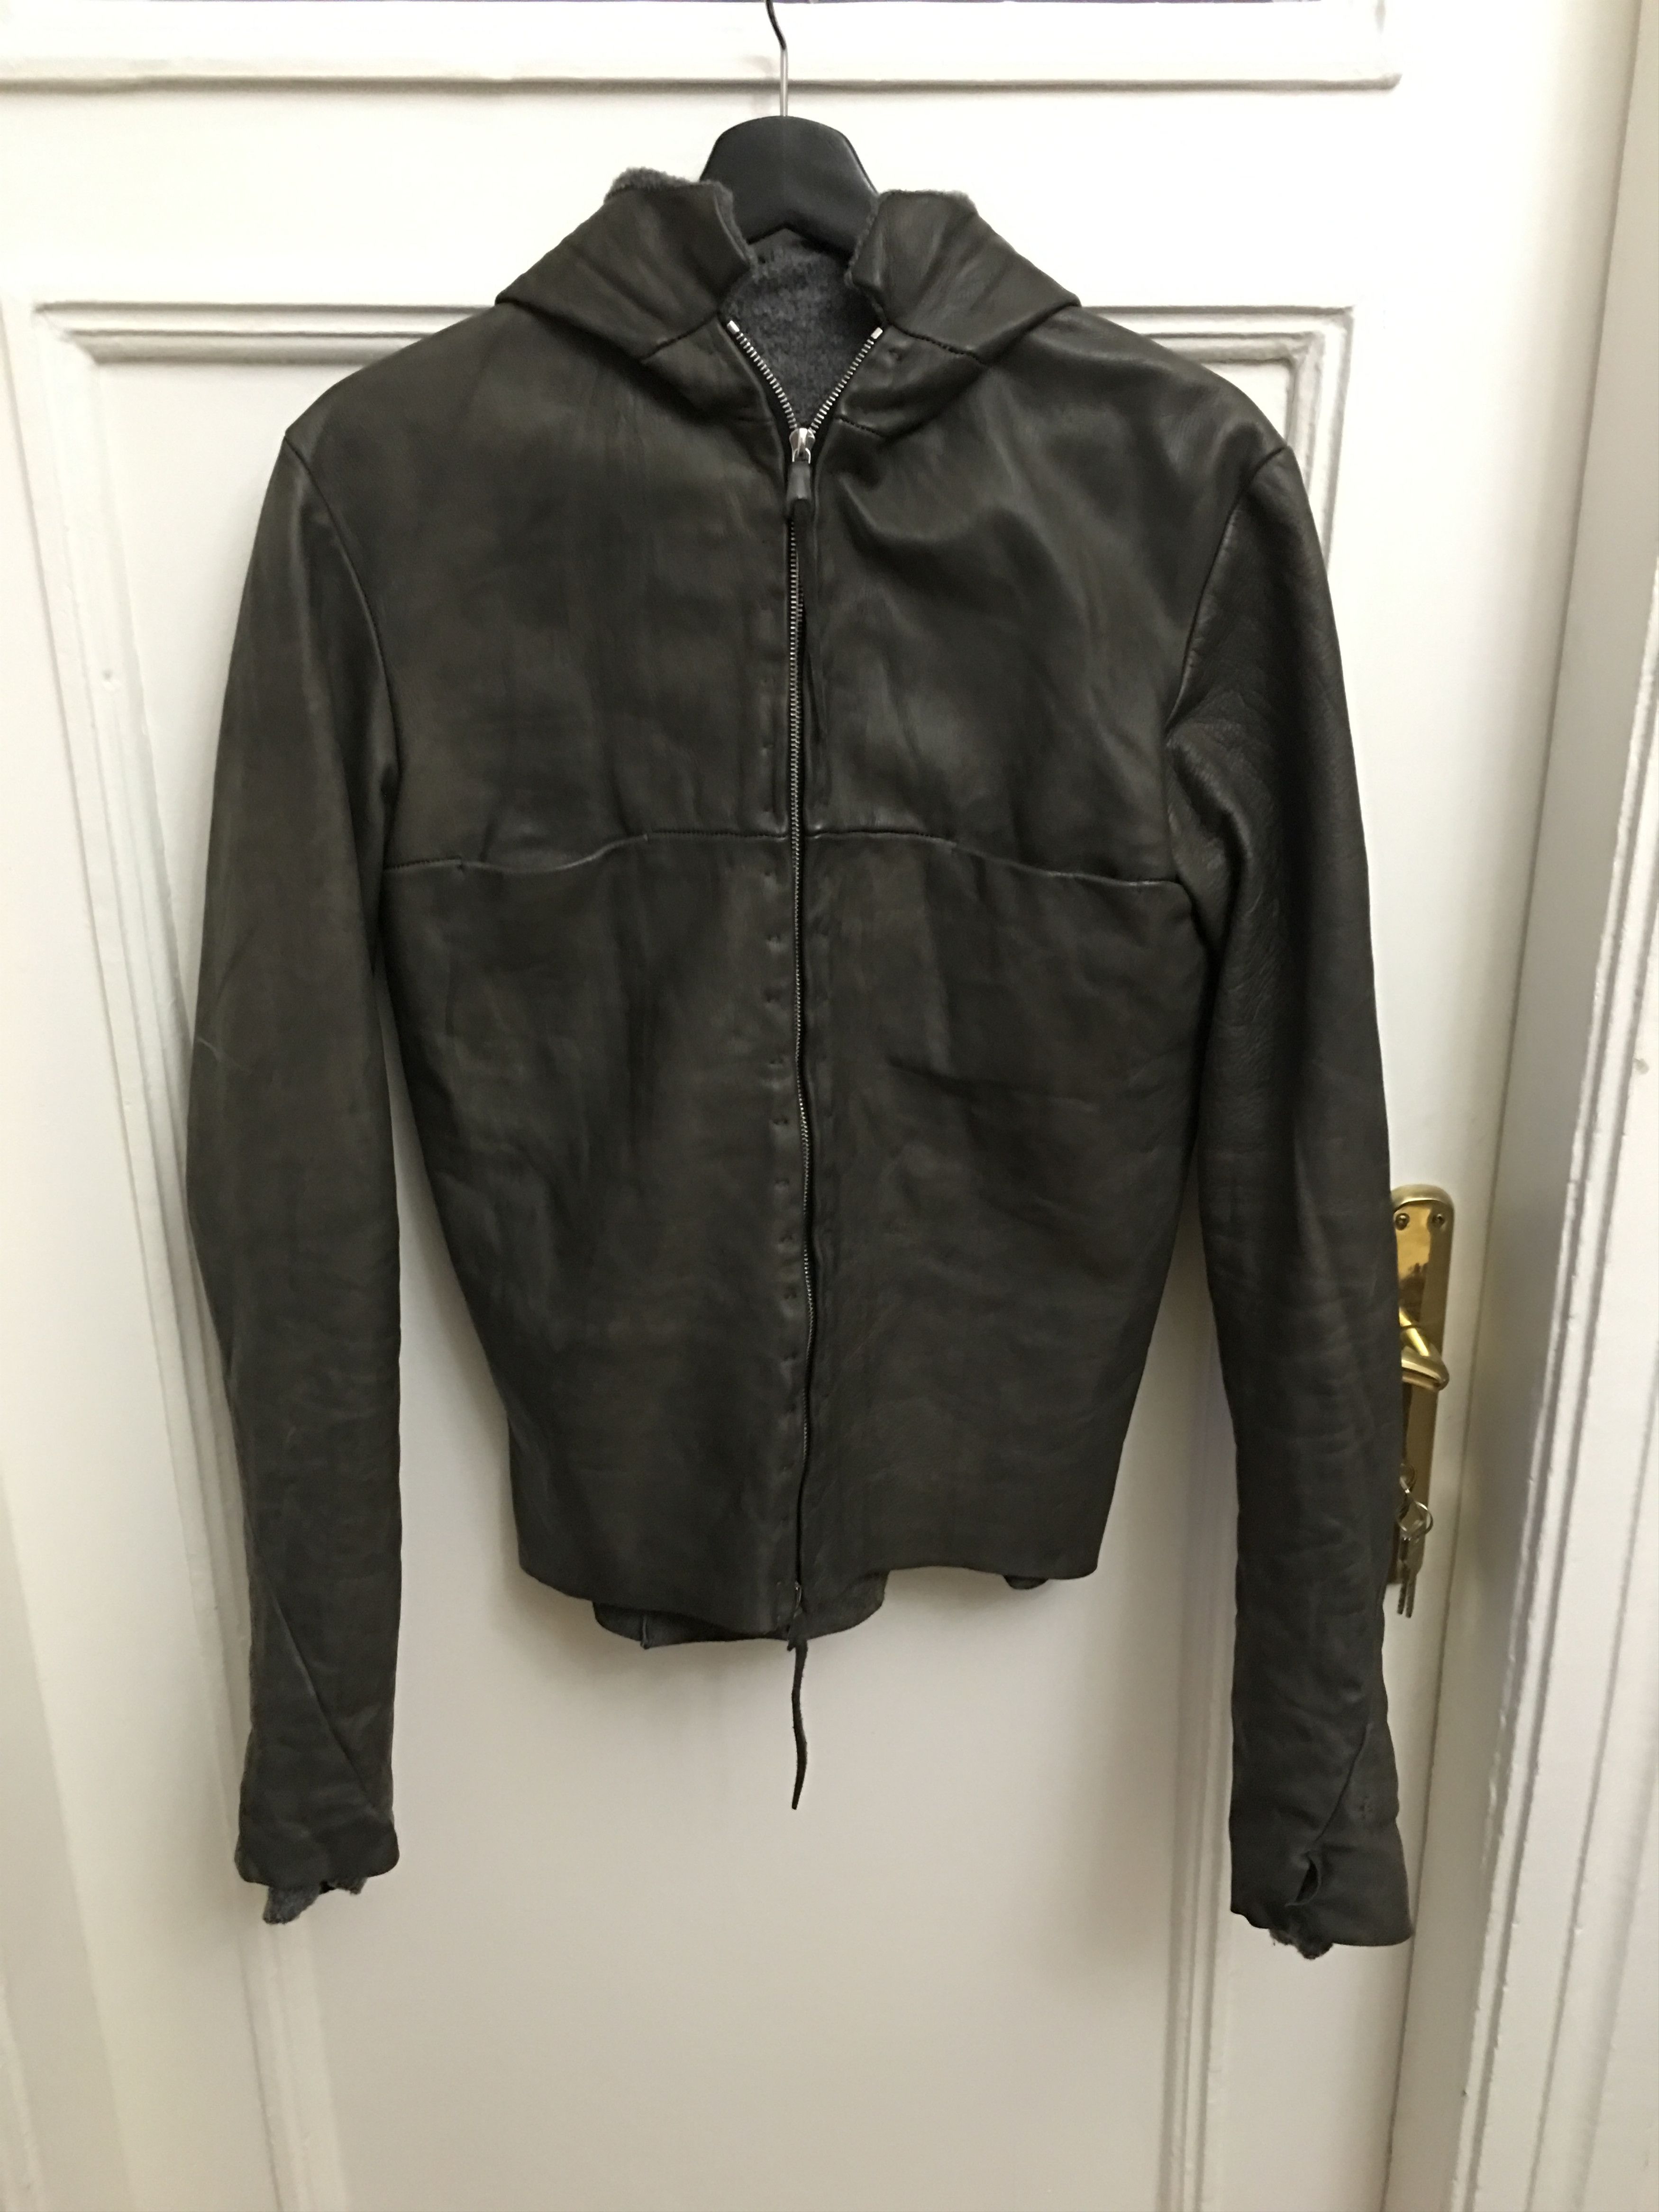 Ma+ Leather hooded Jacket | Grailed